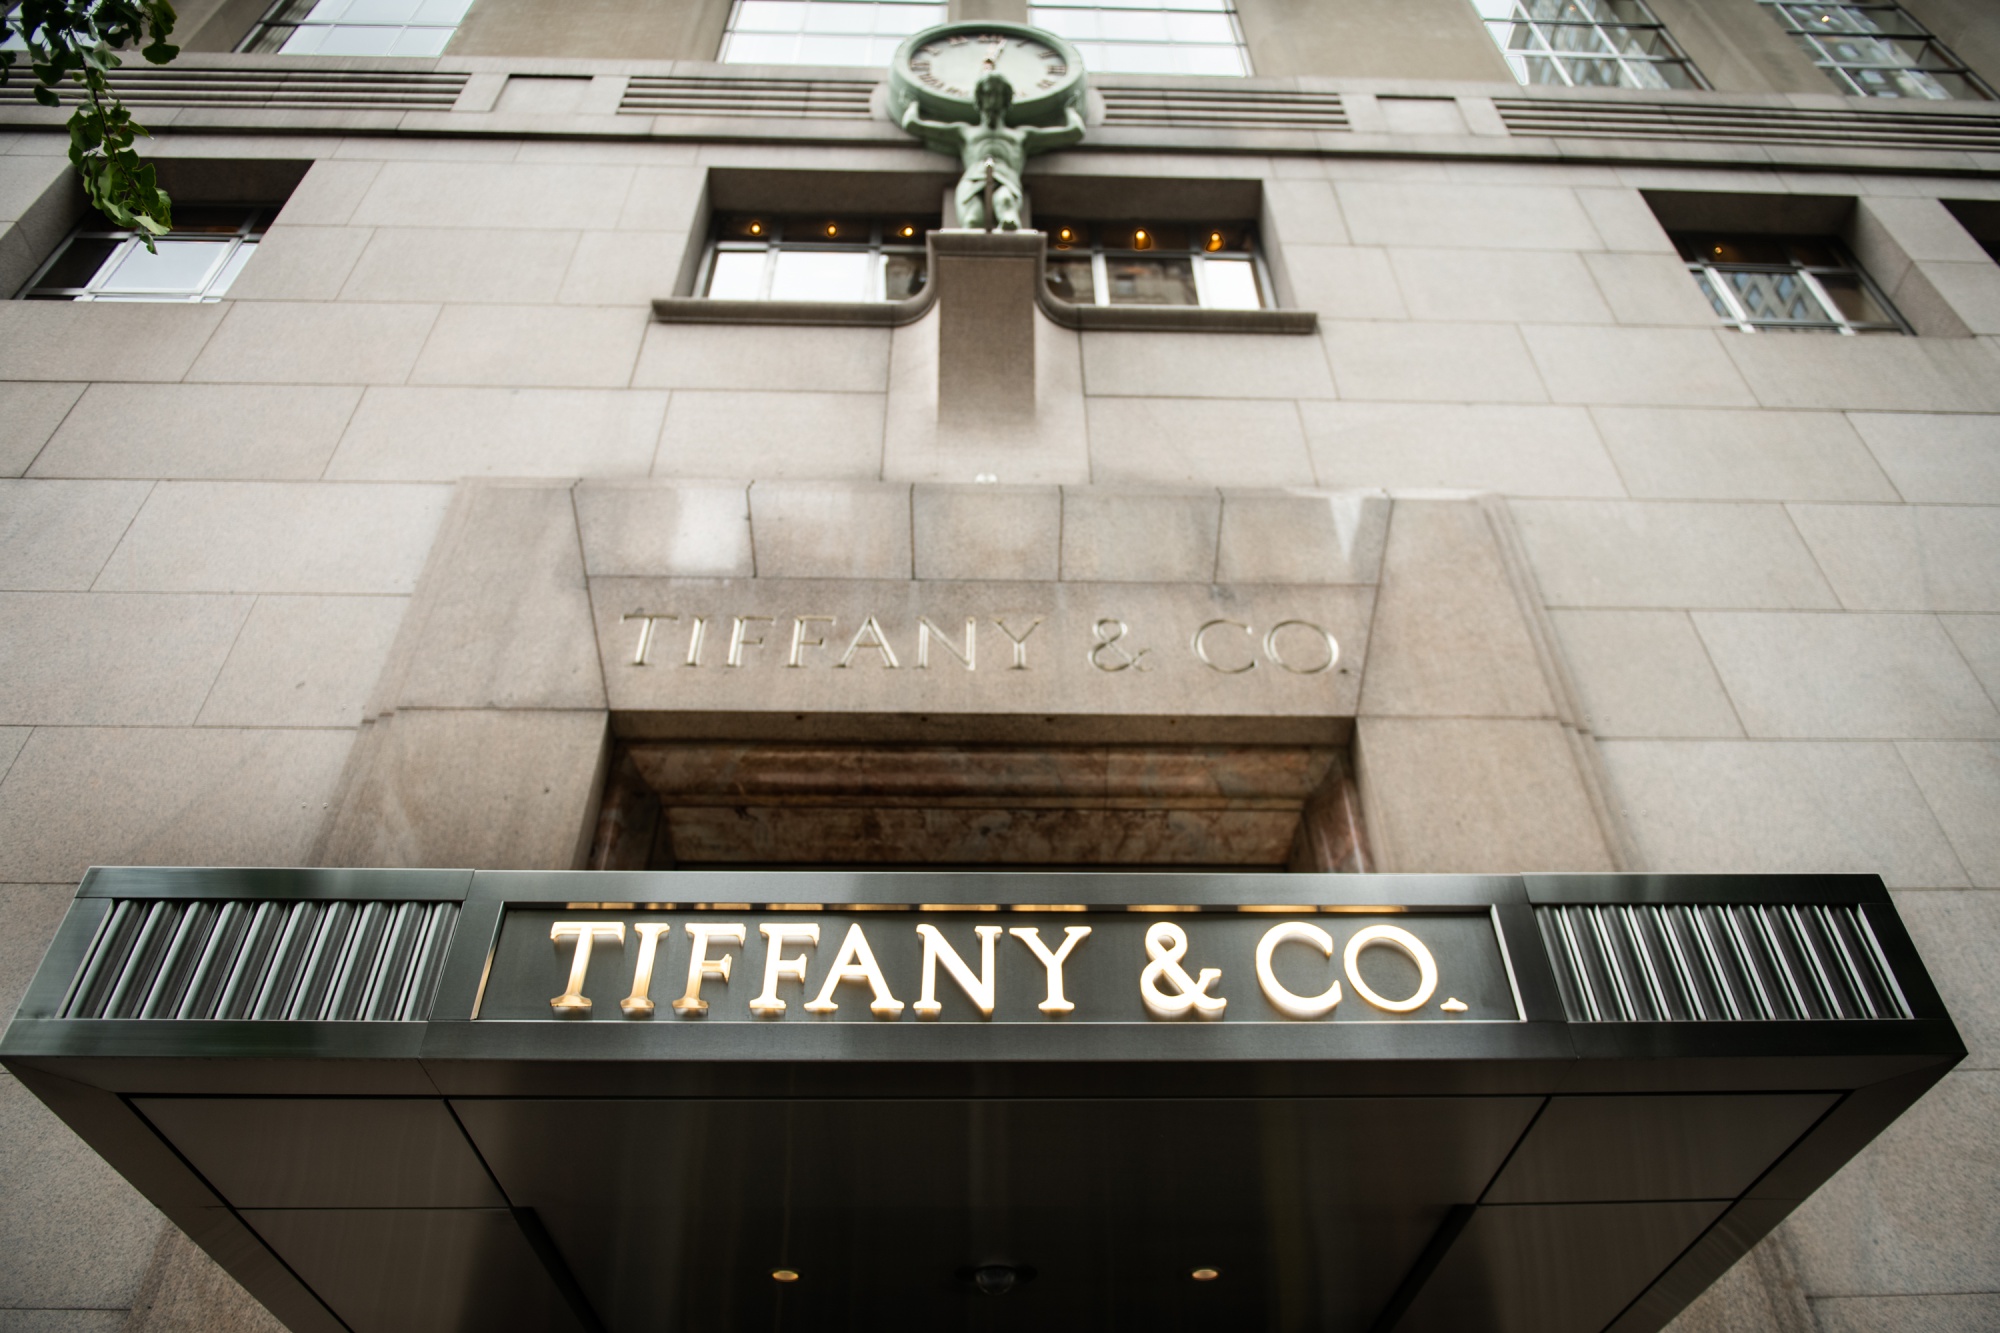 Tiffany Stock Plunges 9% After Report That LVMH Deal Could Fall Through